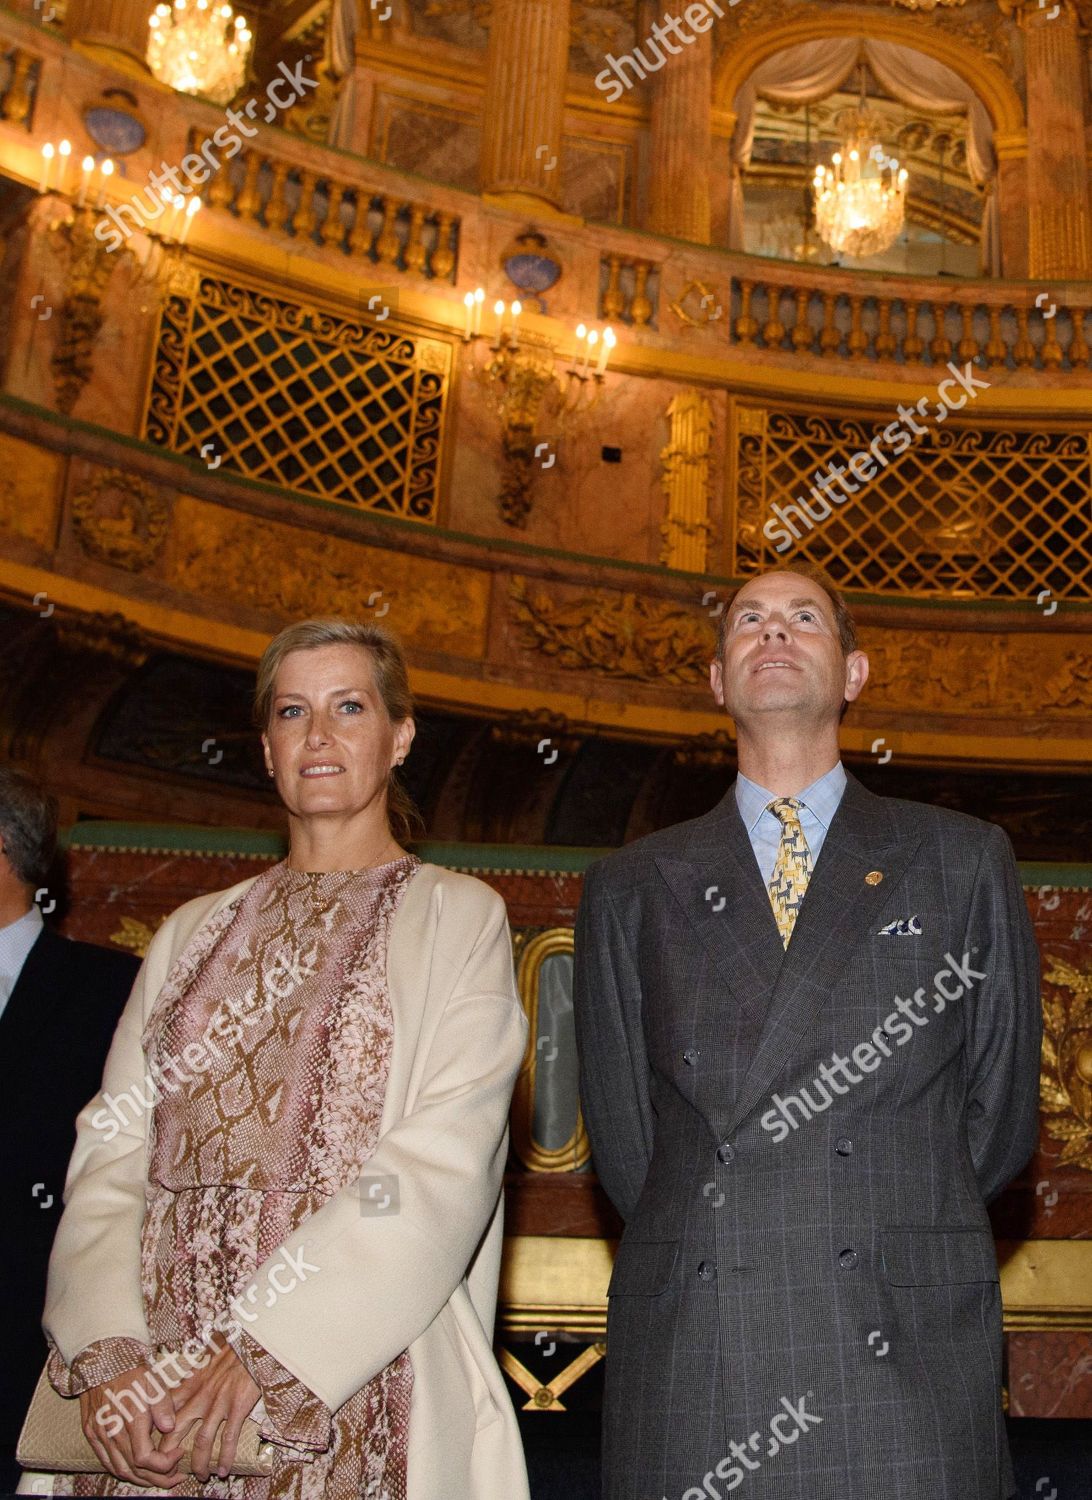 prince-edward-and-sophie-countess-of-wessex-visit-to-france-shutterstock-editorial-9907868bp.jpg